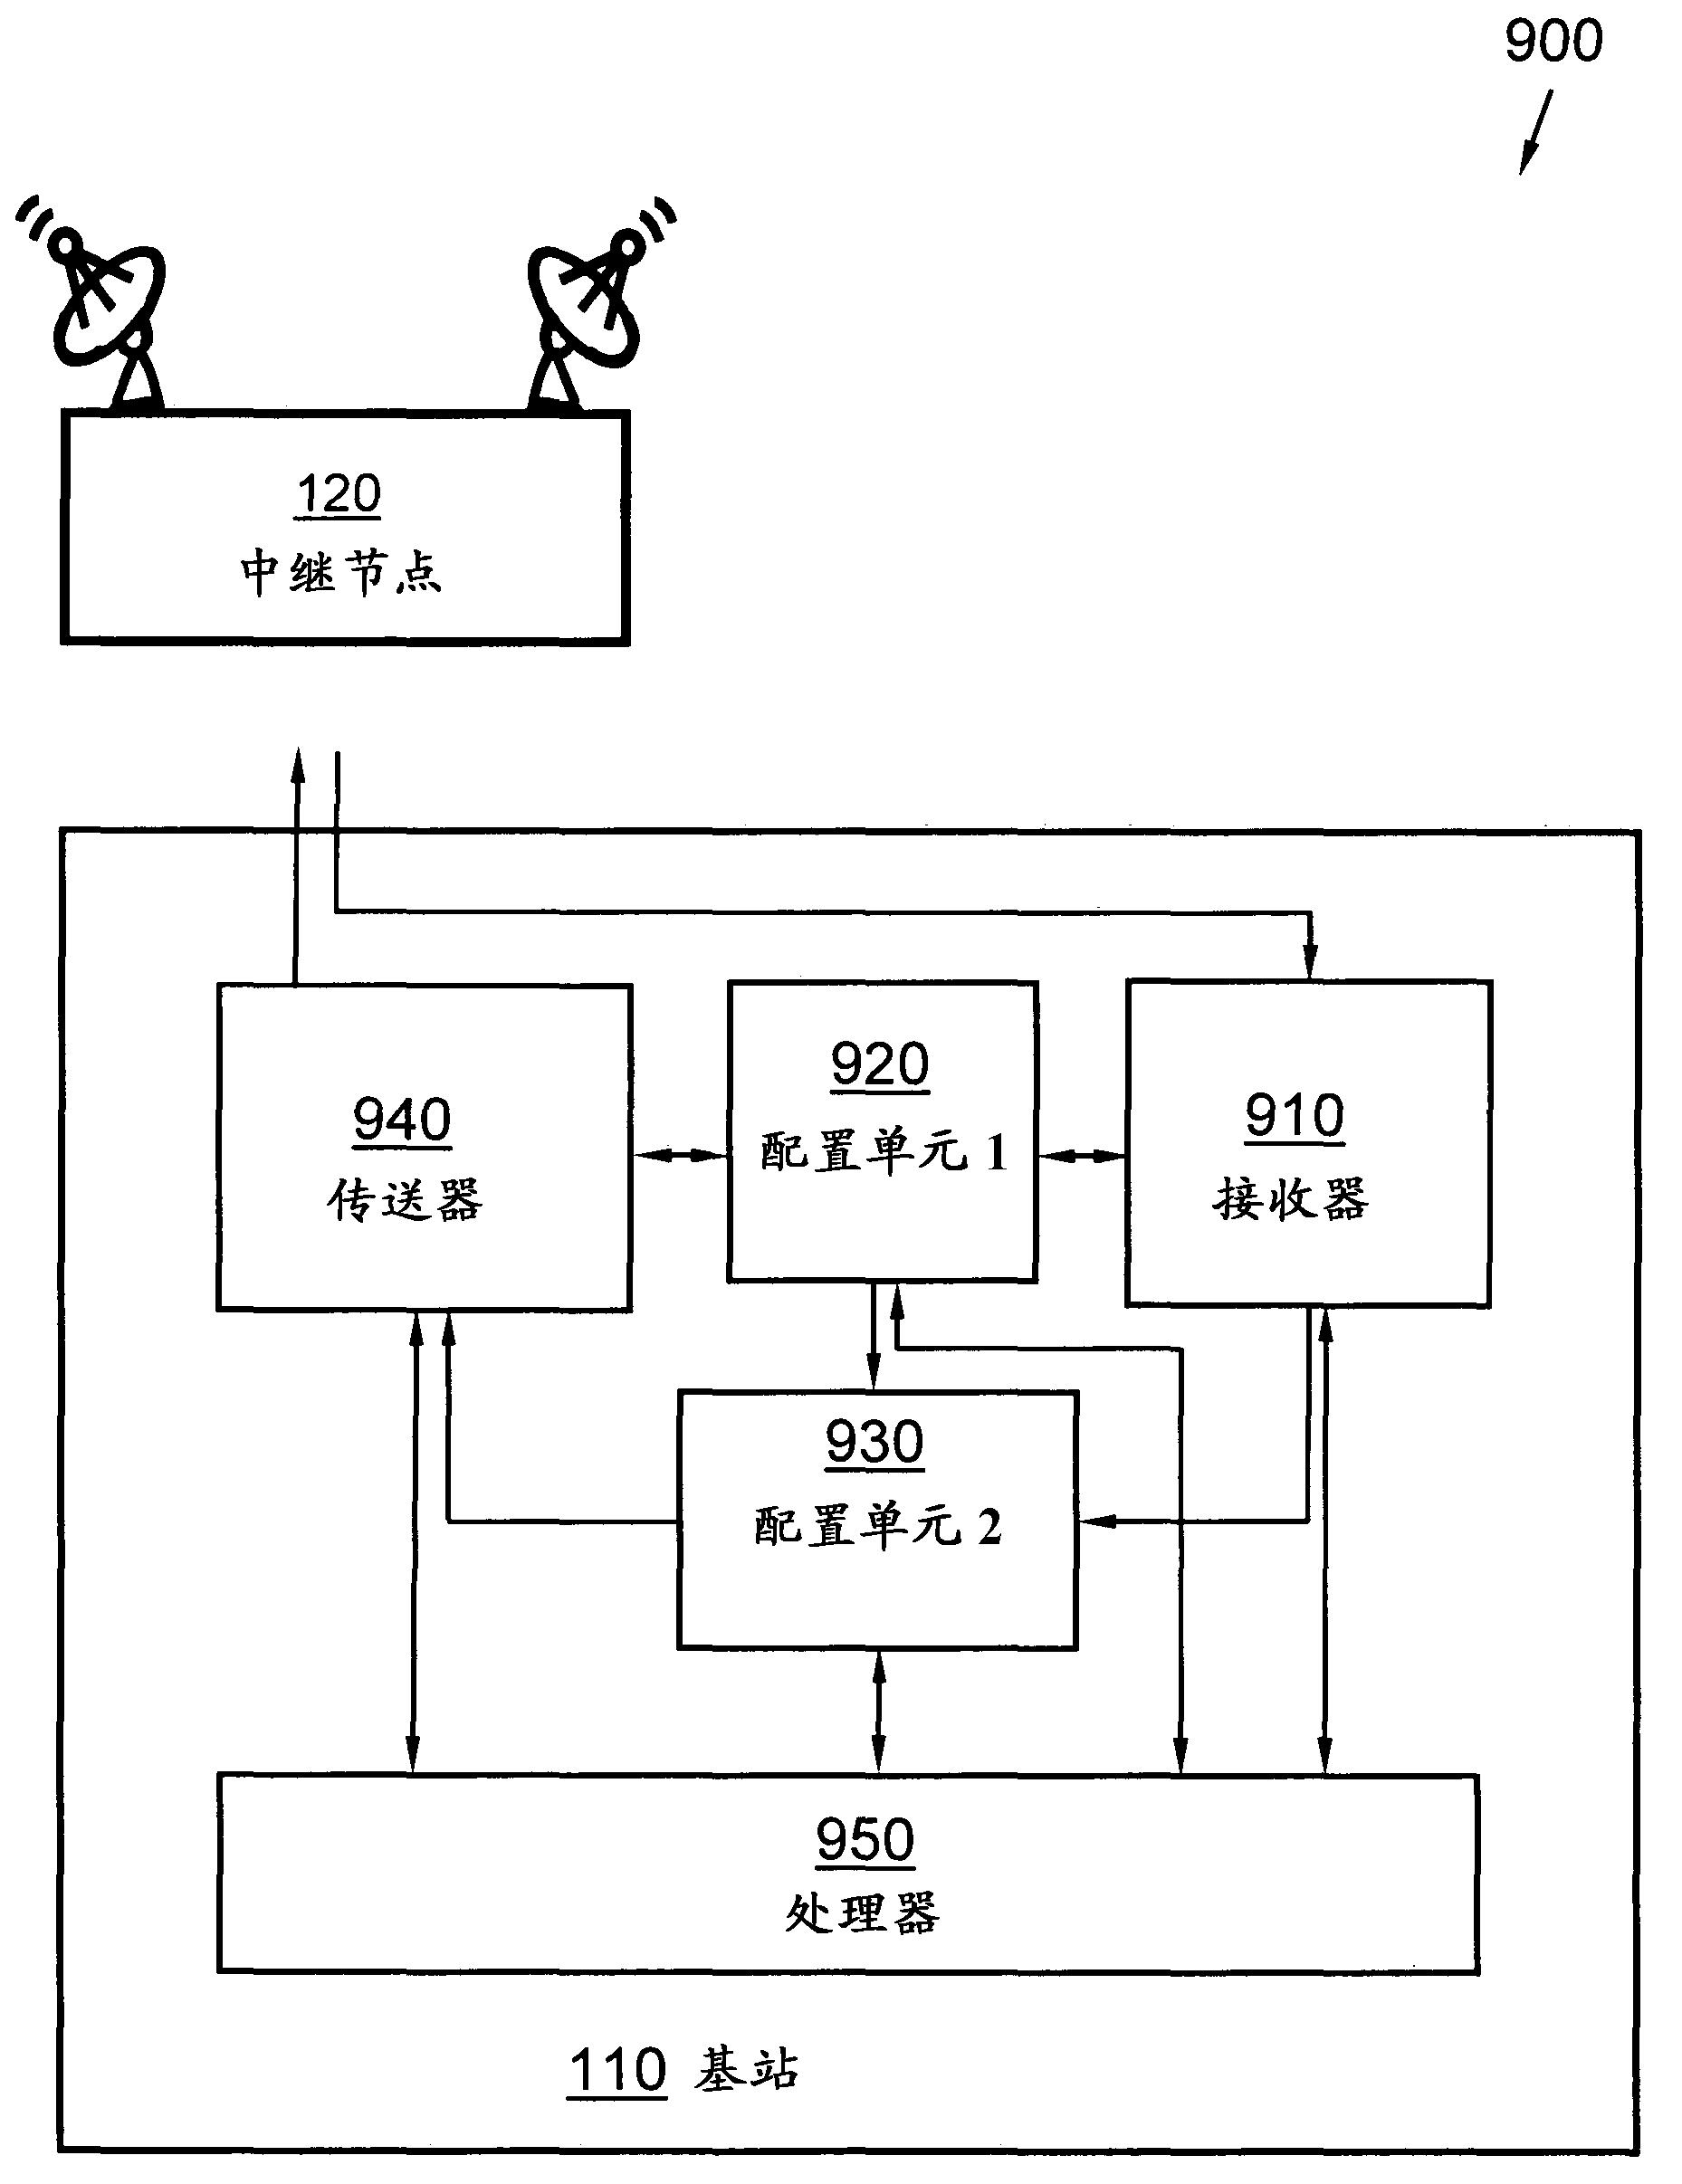 Method and arrangement in a wireless communication network